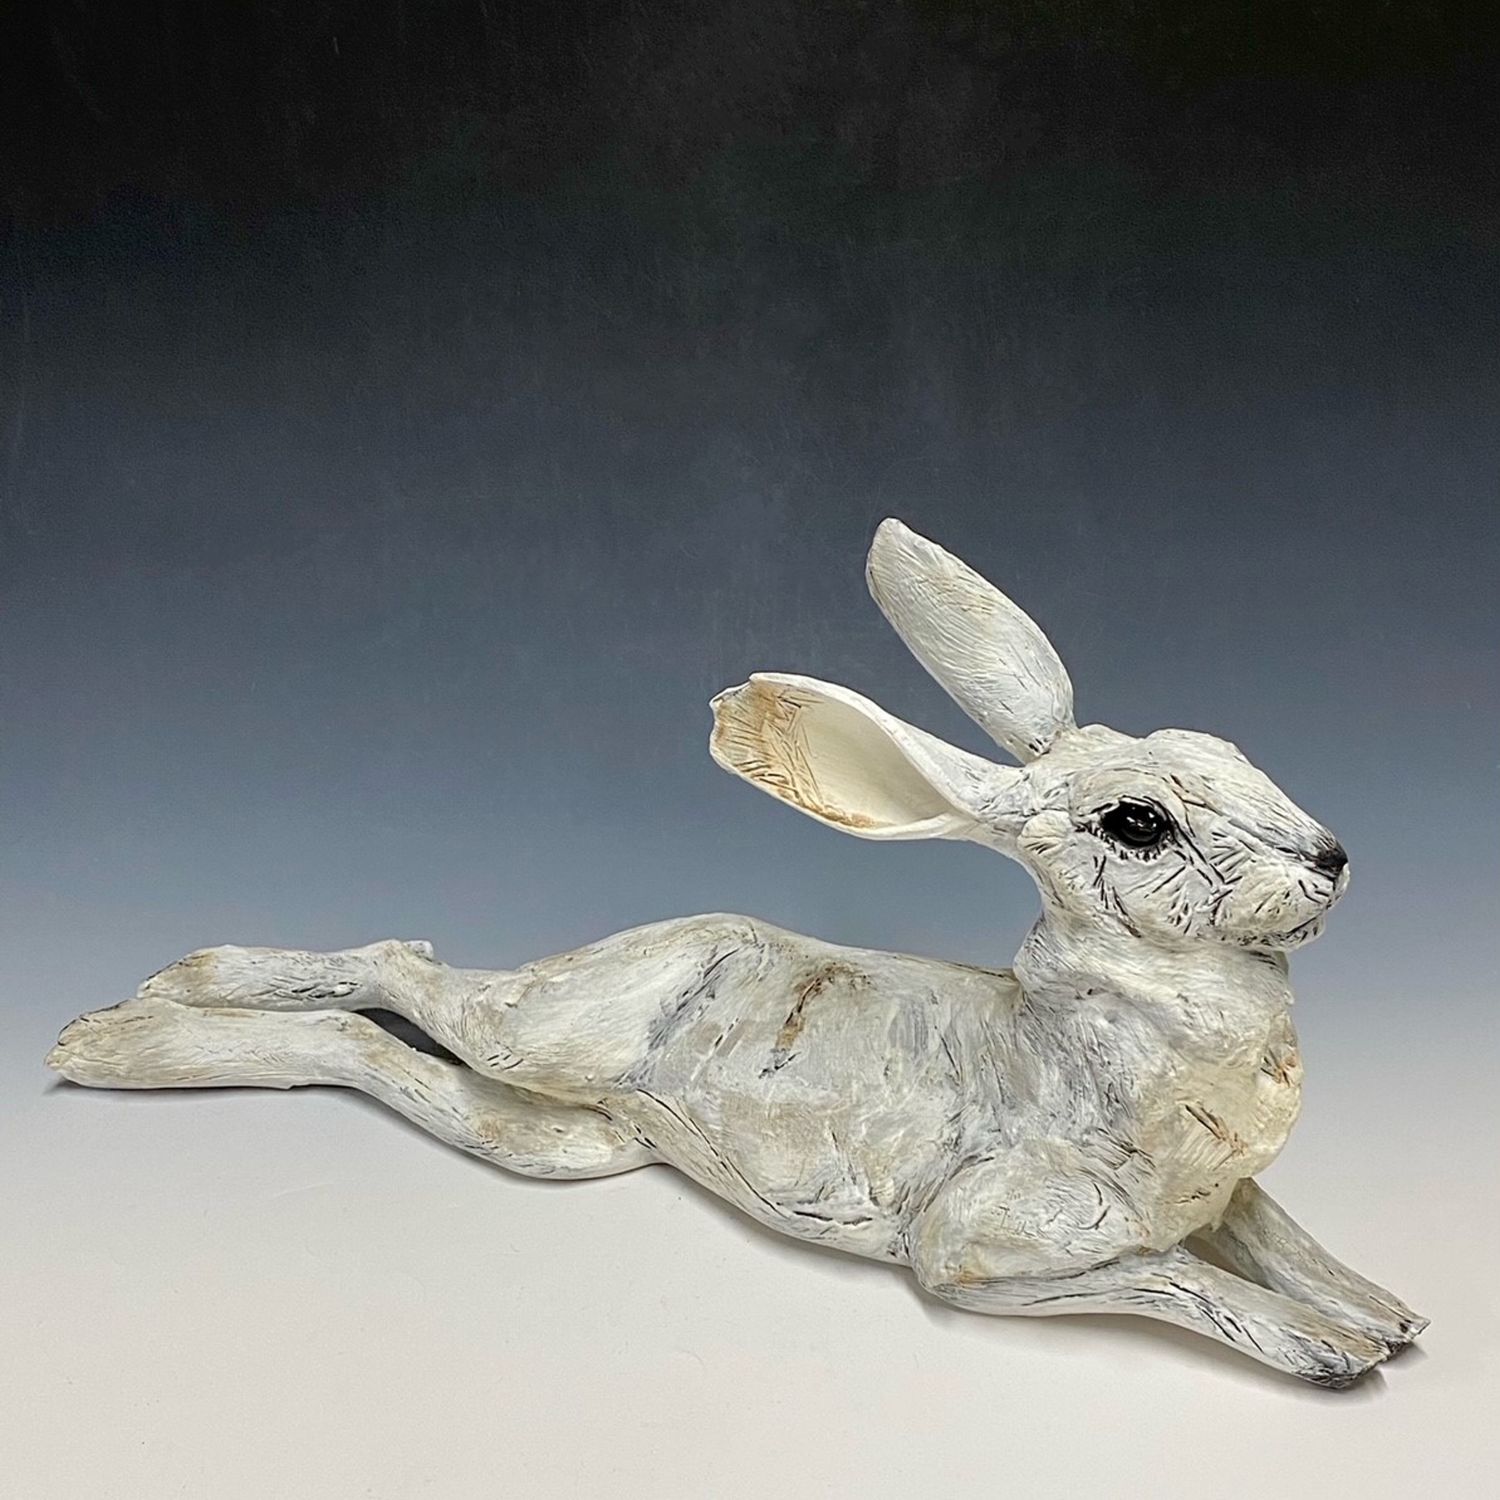 Mary Philpott: Reclining Hare Product Image 1 of 2